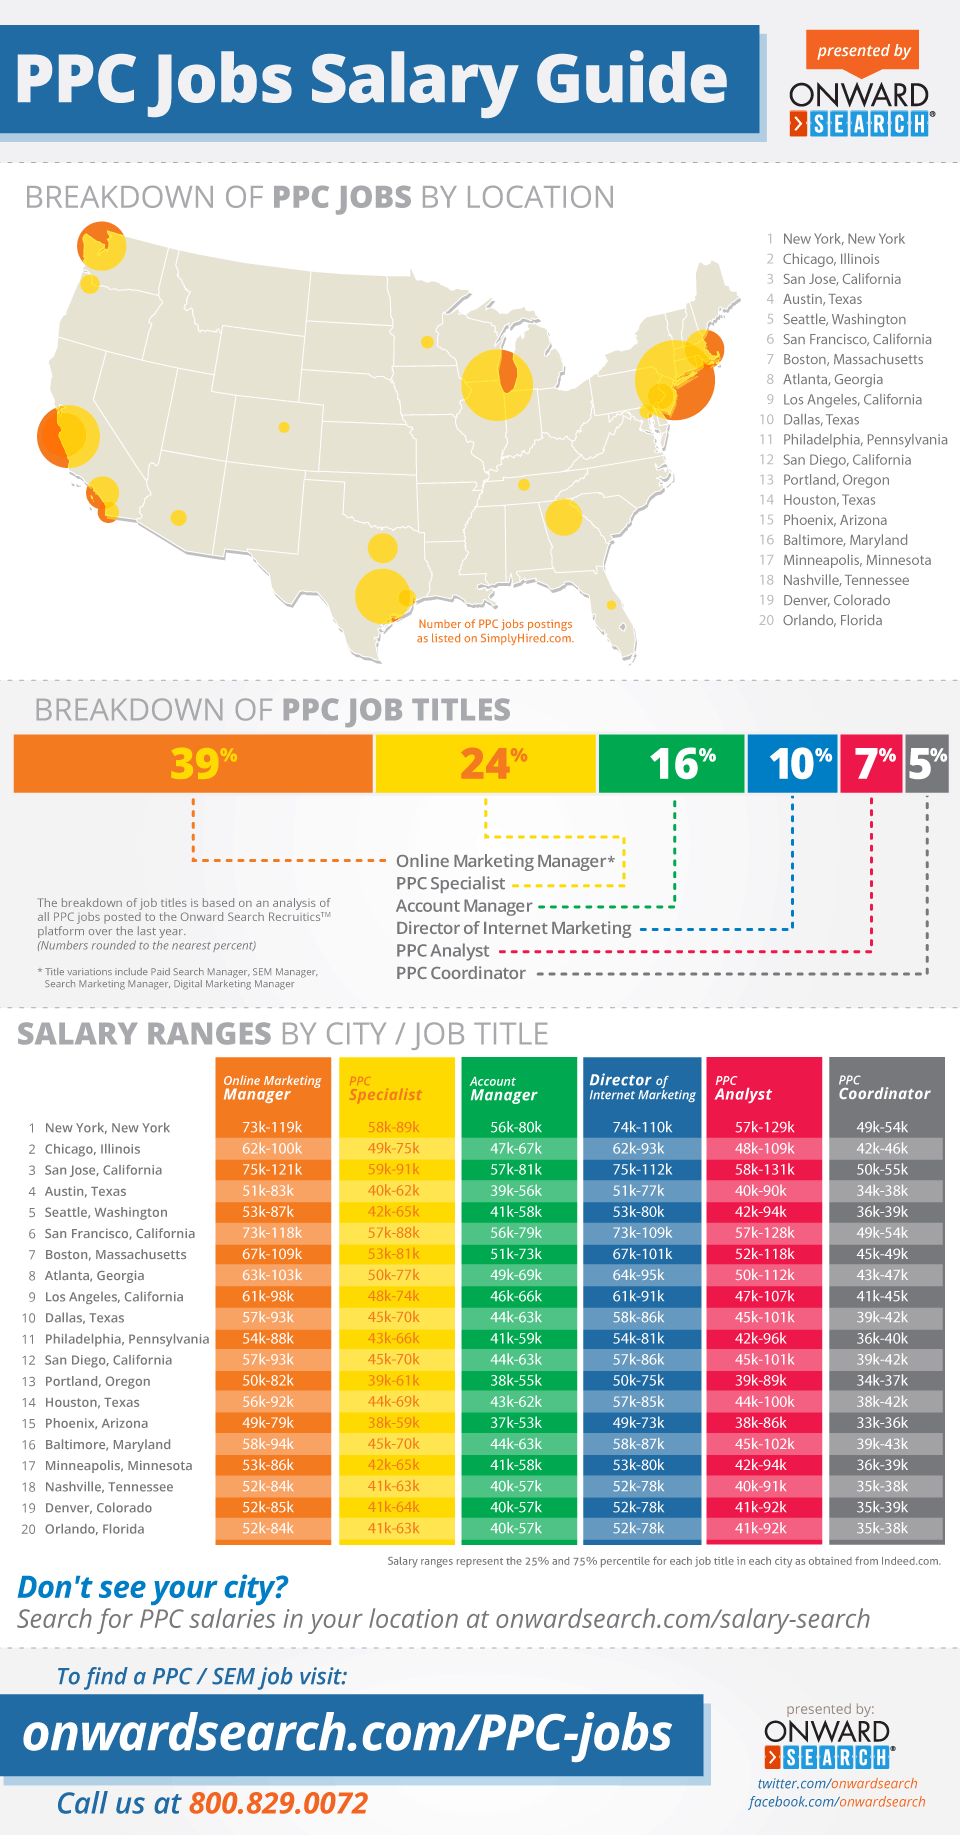 PPC Jobs and Salaries Guide